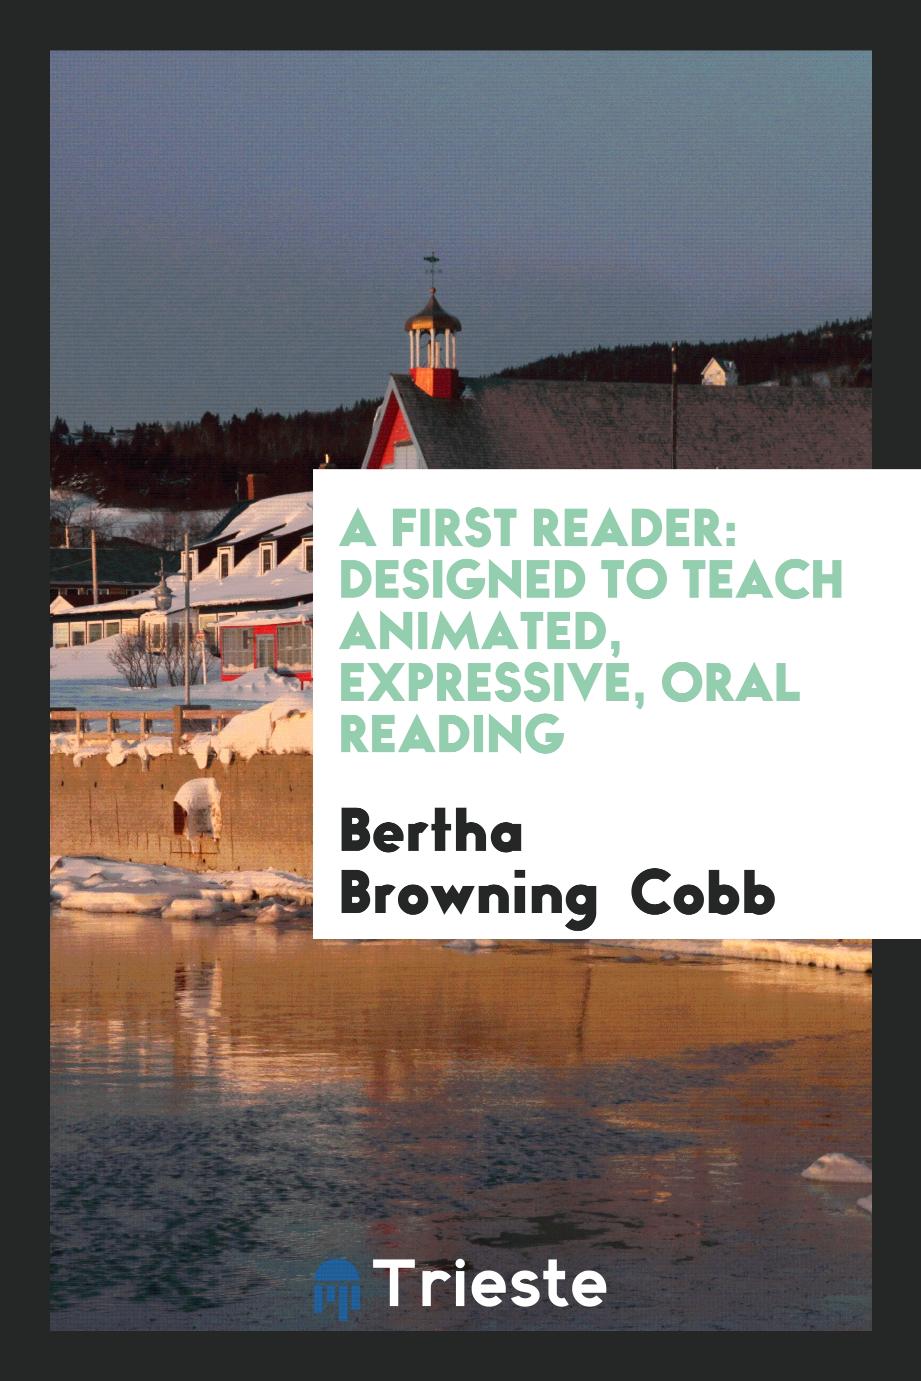 A First Reader: Designed to Teach Animated, Expressive, Oral Reading